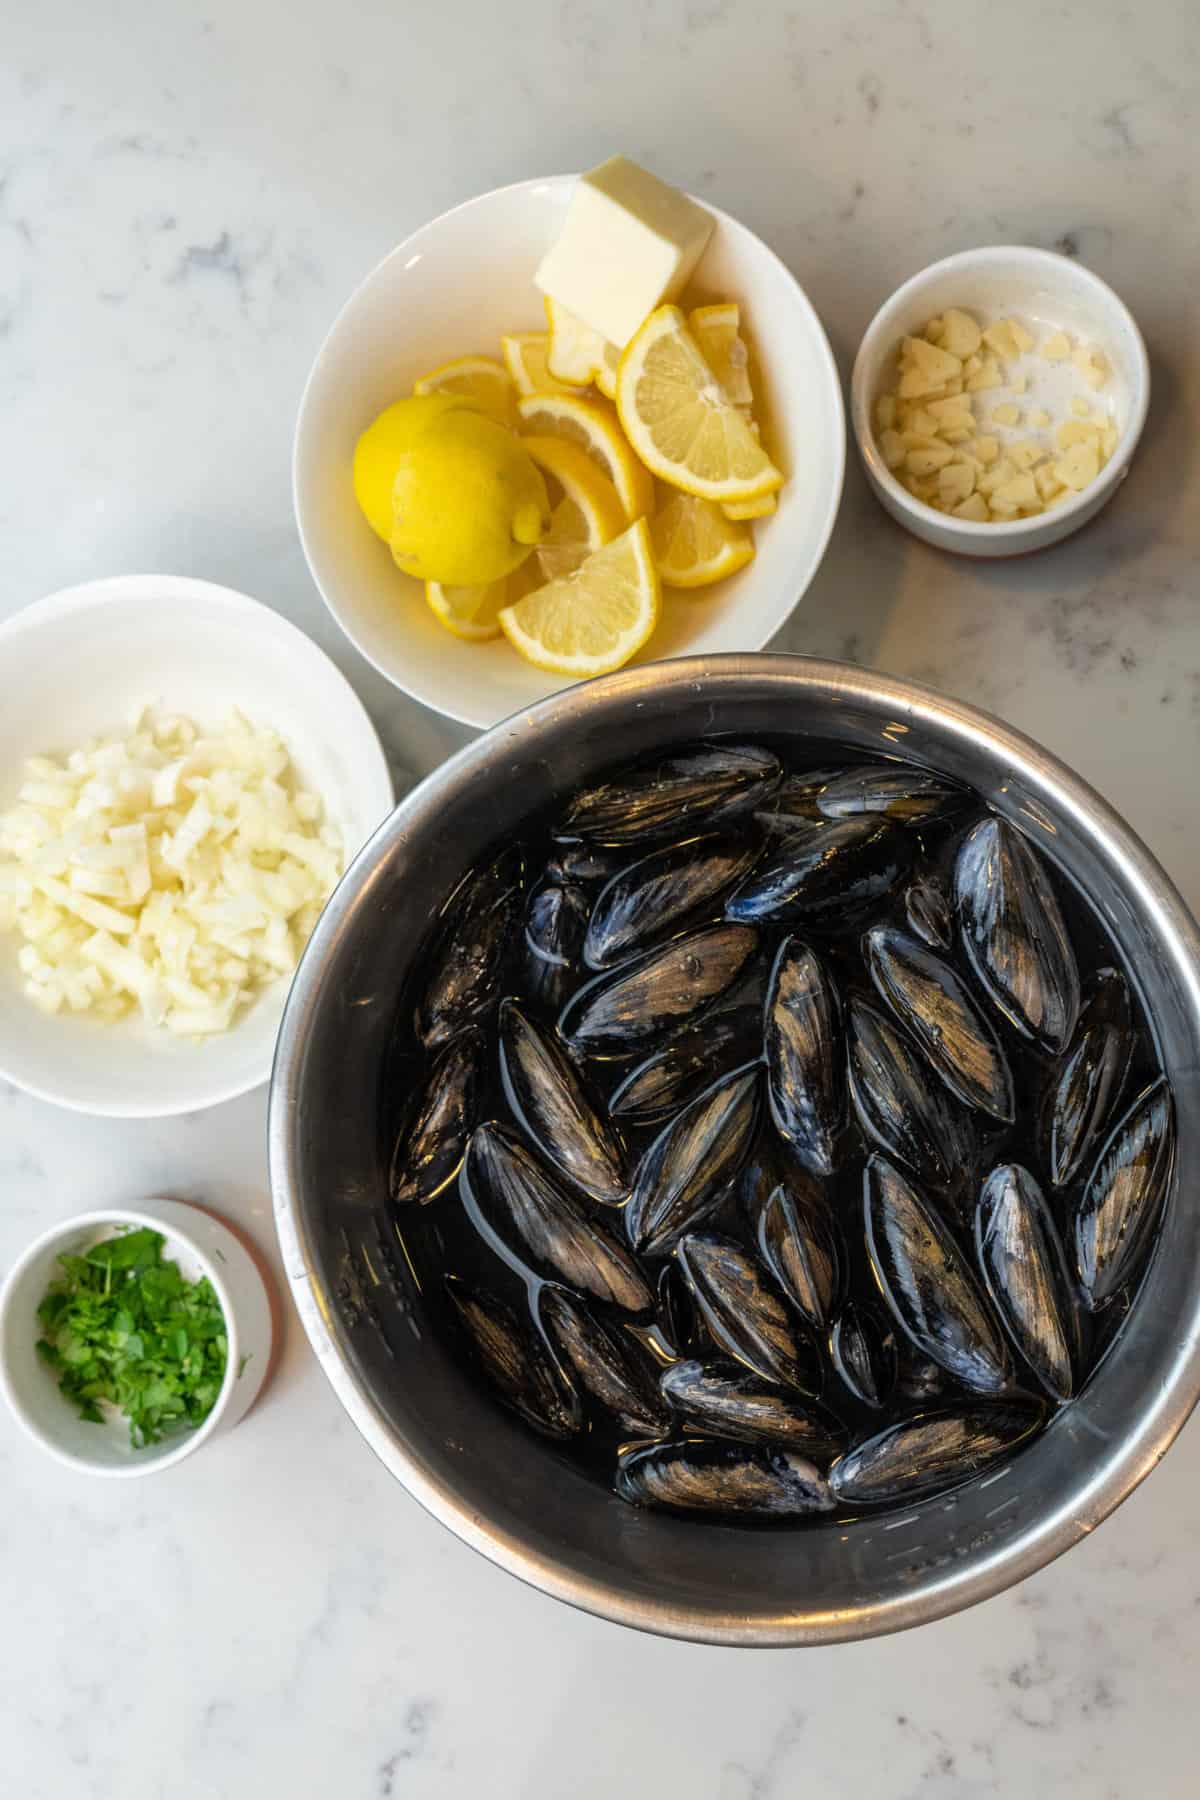 Toss any mussels that haven't opened. This means they died before the cooking process. 